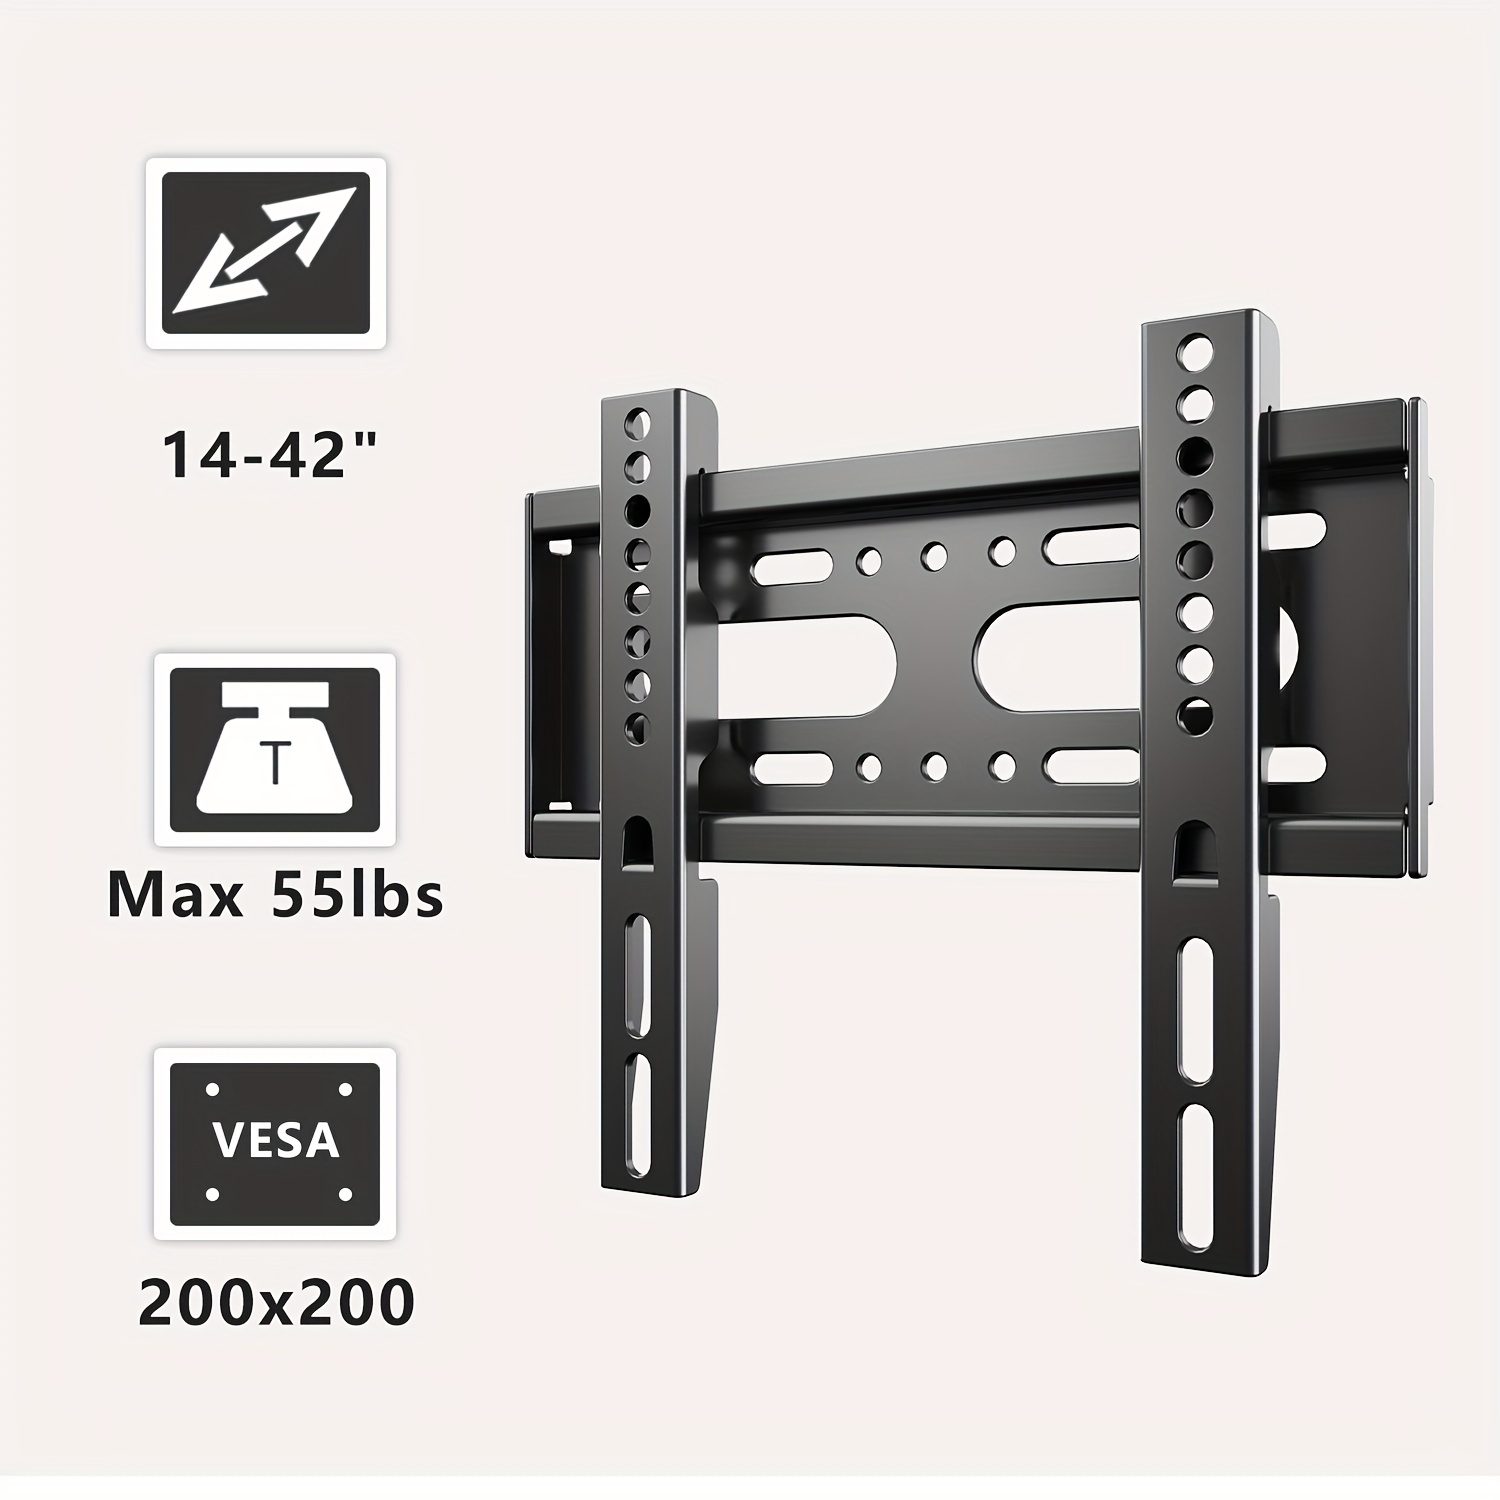 

Tv Wall Mount Fixed Monitor Bracket Low Profile Most 14"-42" Flat Curved 19 24 28 29 32 35 39 Inch Small Televisions Screen Up To Vesa 200x200mm 25kg Max Load Wall Mount Bracket